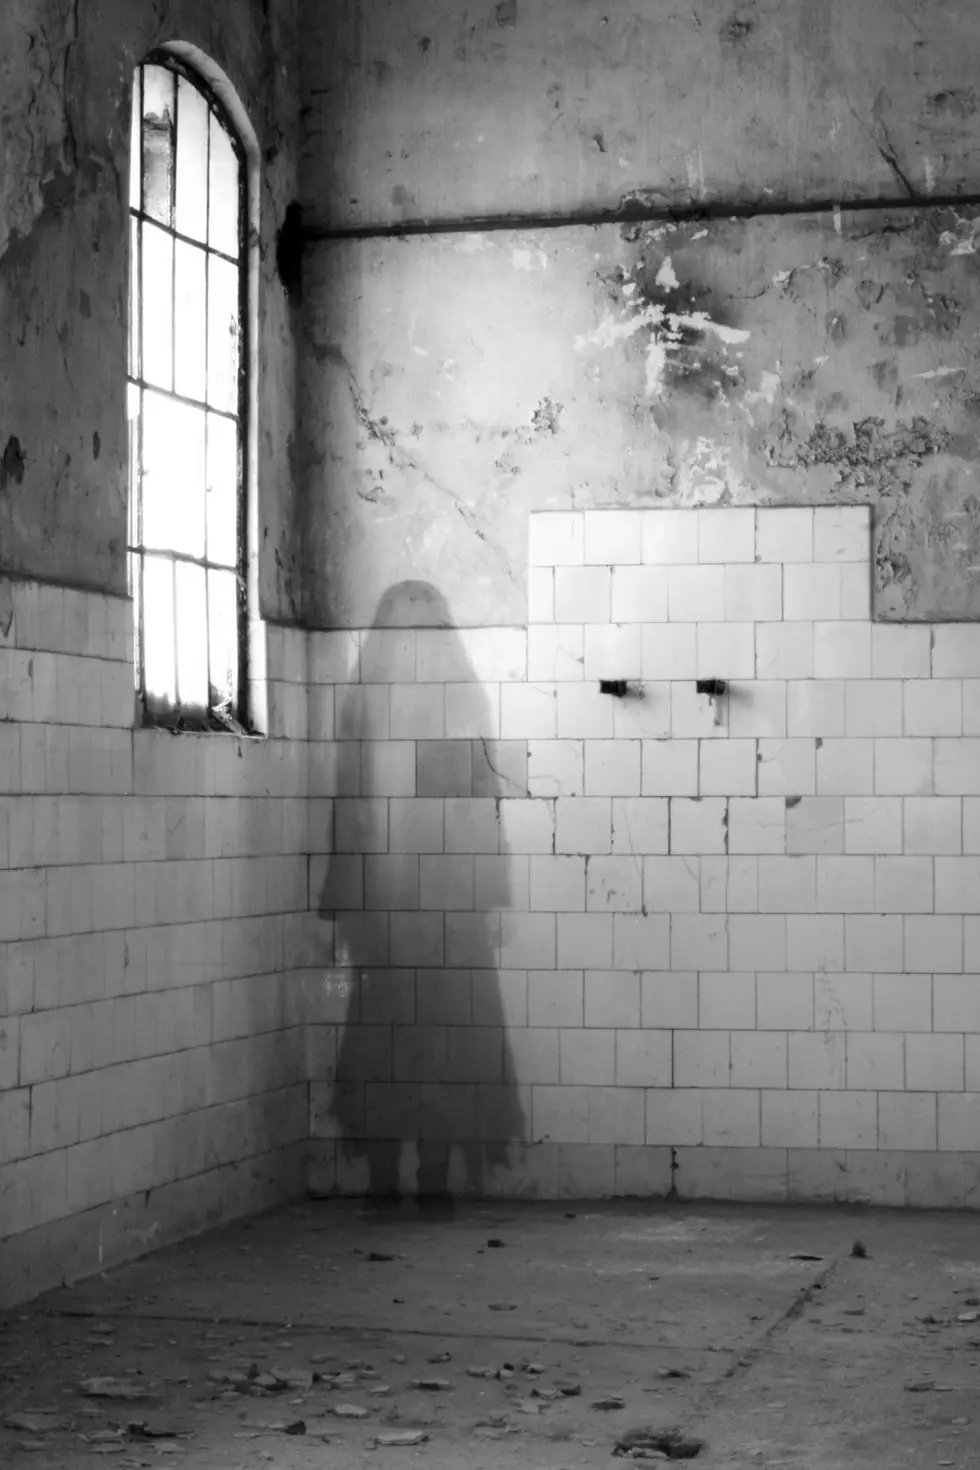 Ghosts in the Old Prison?